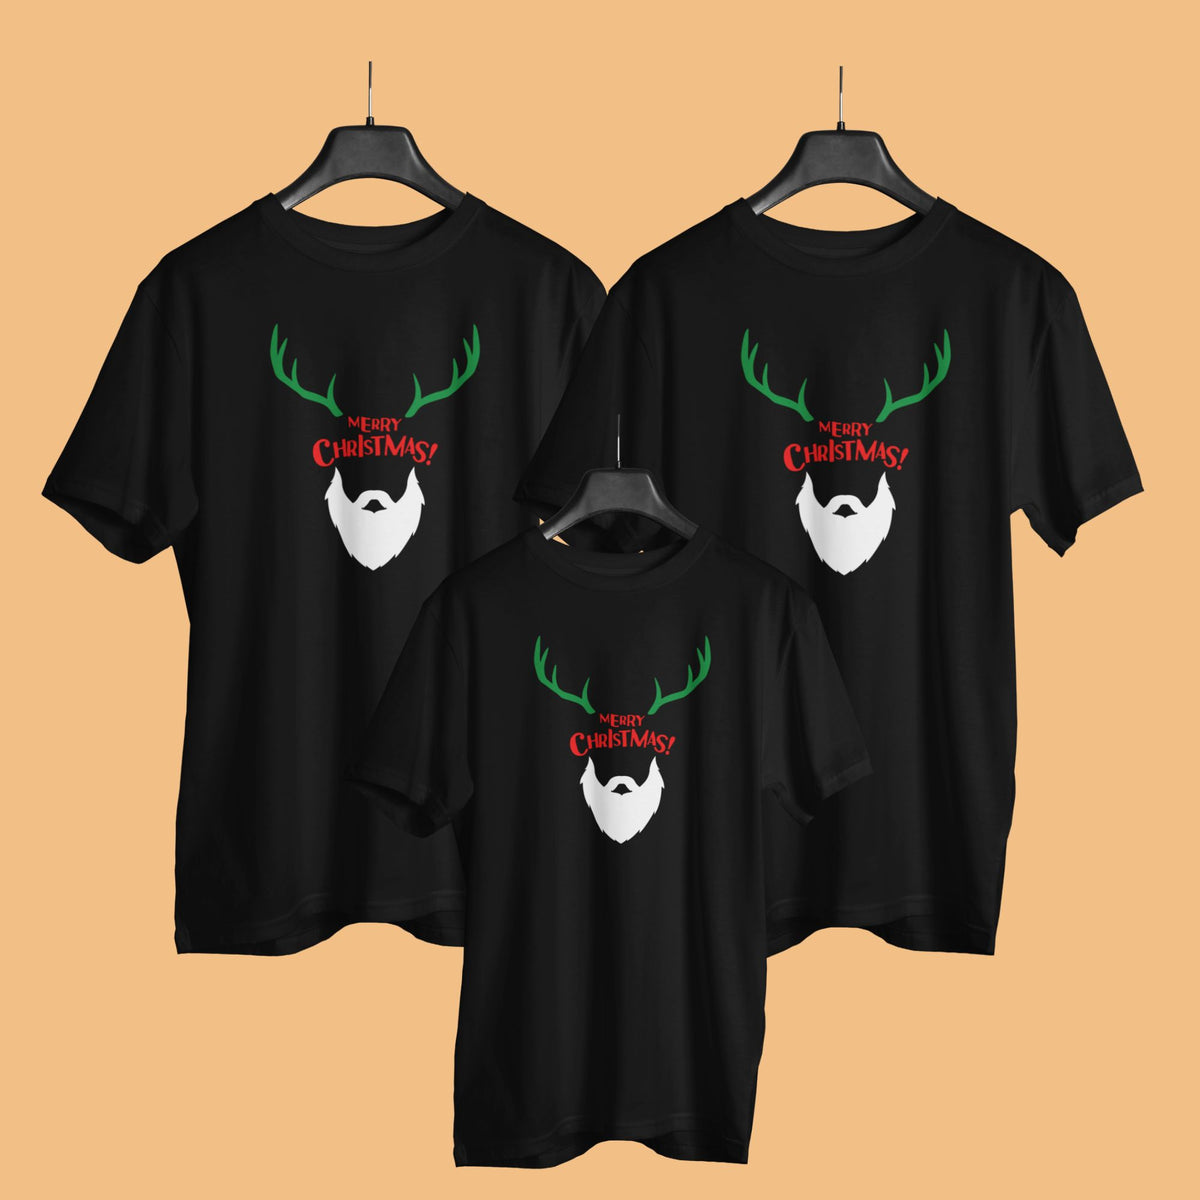 merry-christmas-matching-family-black-t-shirts-for-mom-dad-son-daughter-gogirgit-hanger